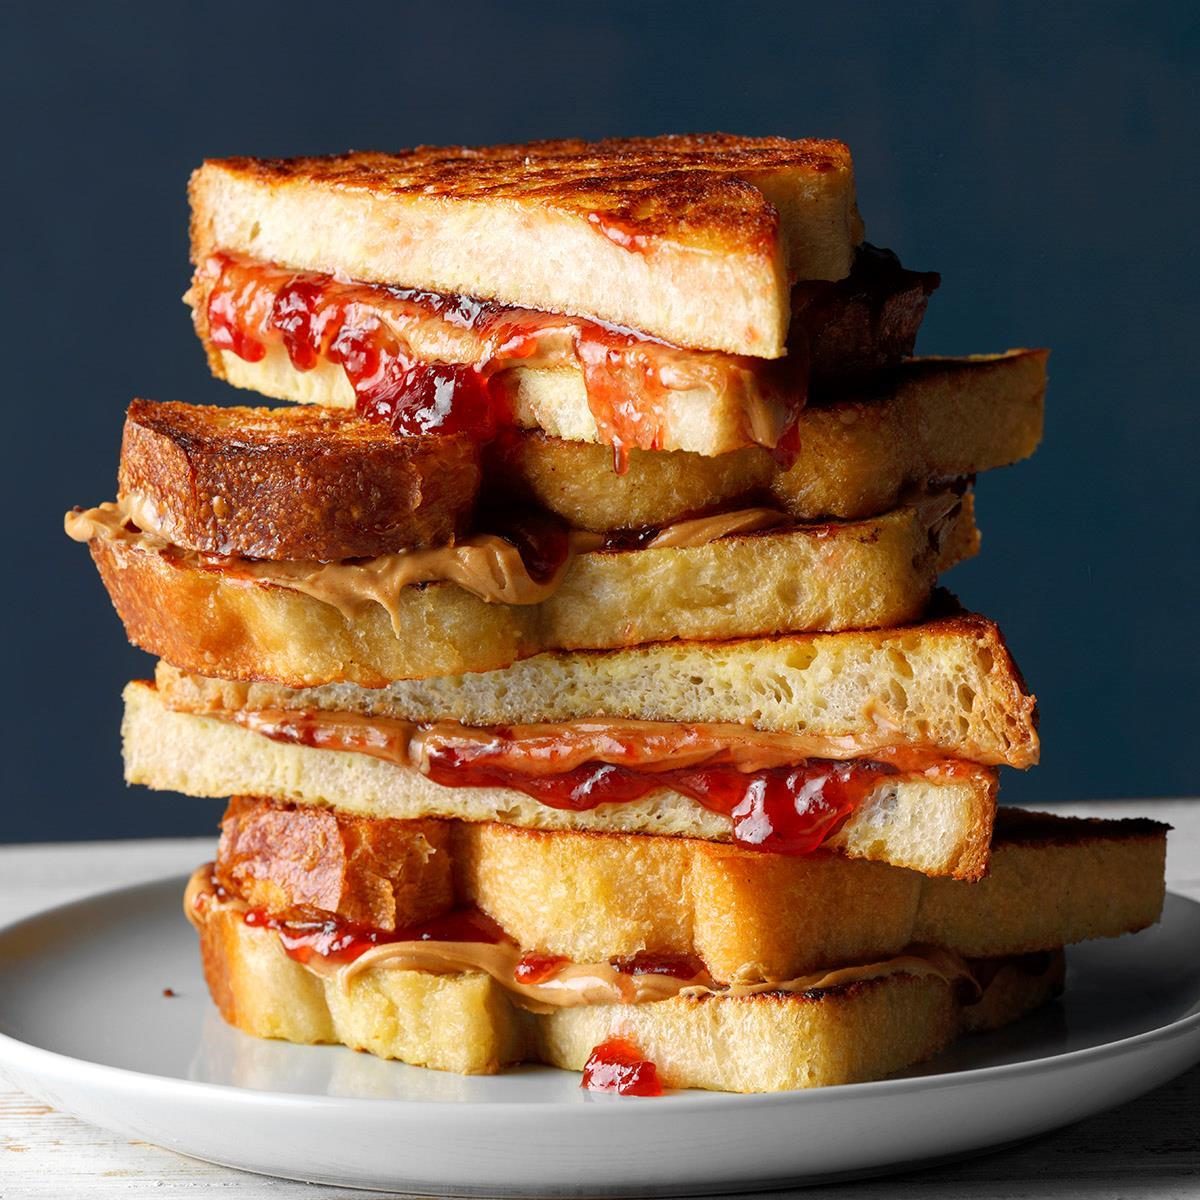 Oklahoma: Peanut Butter and Jelly French Toast